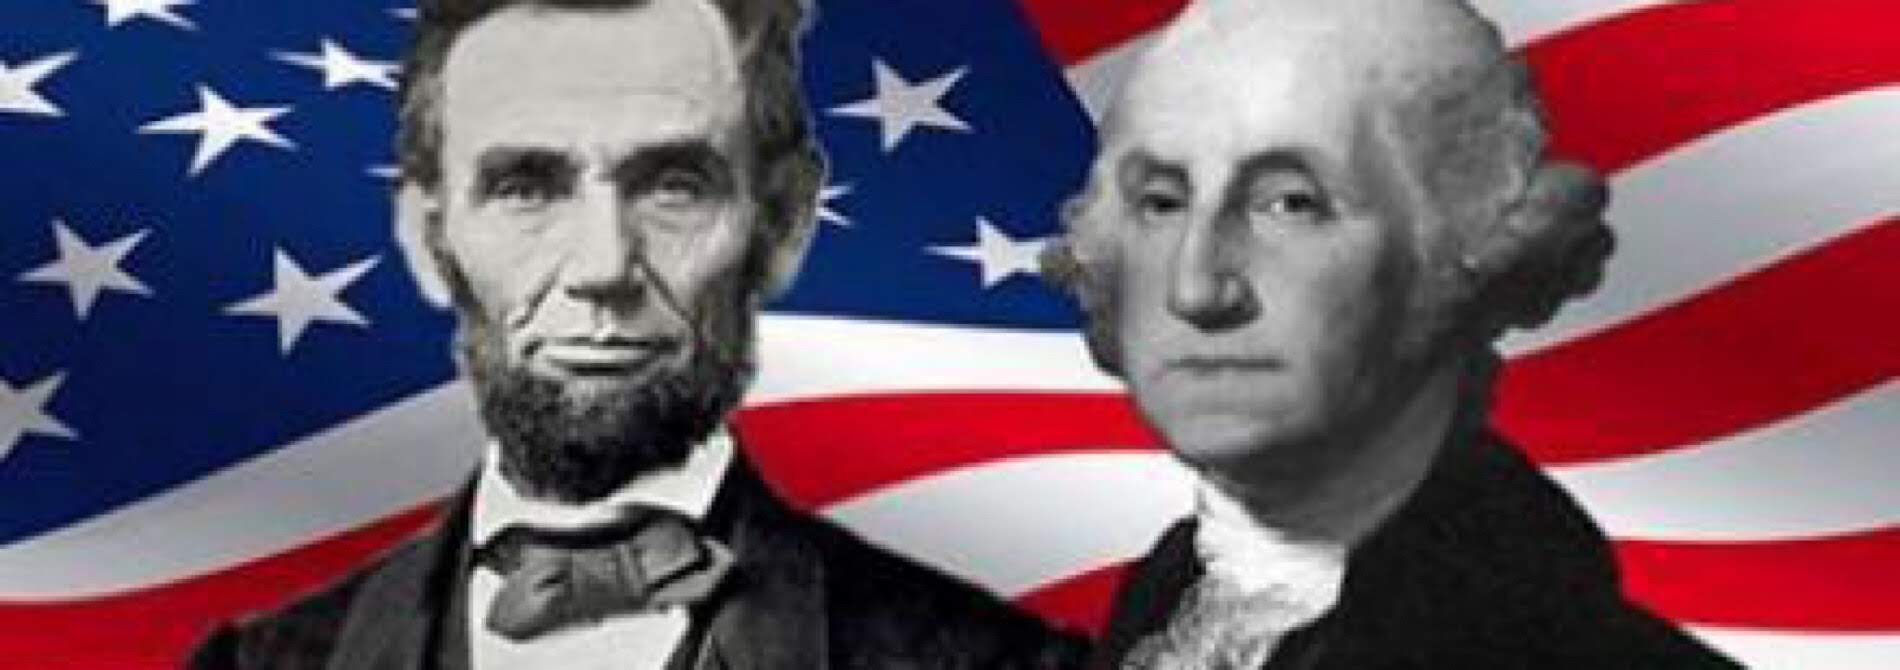 george washington and abe lincoln